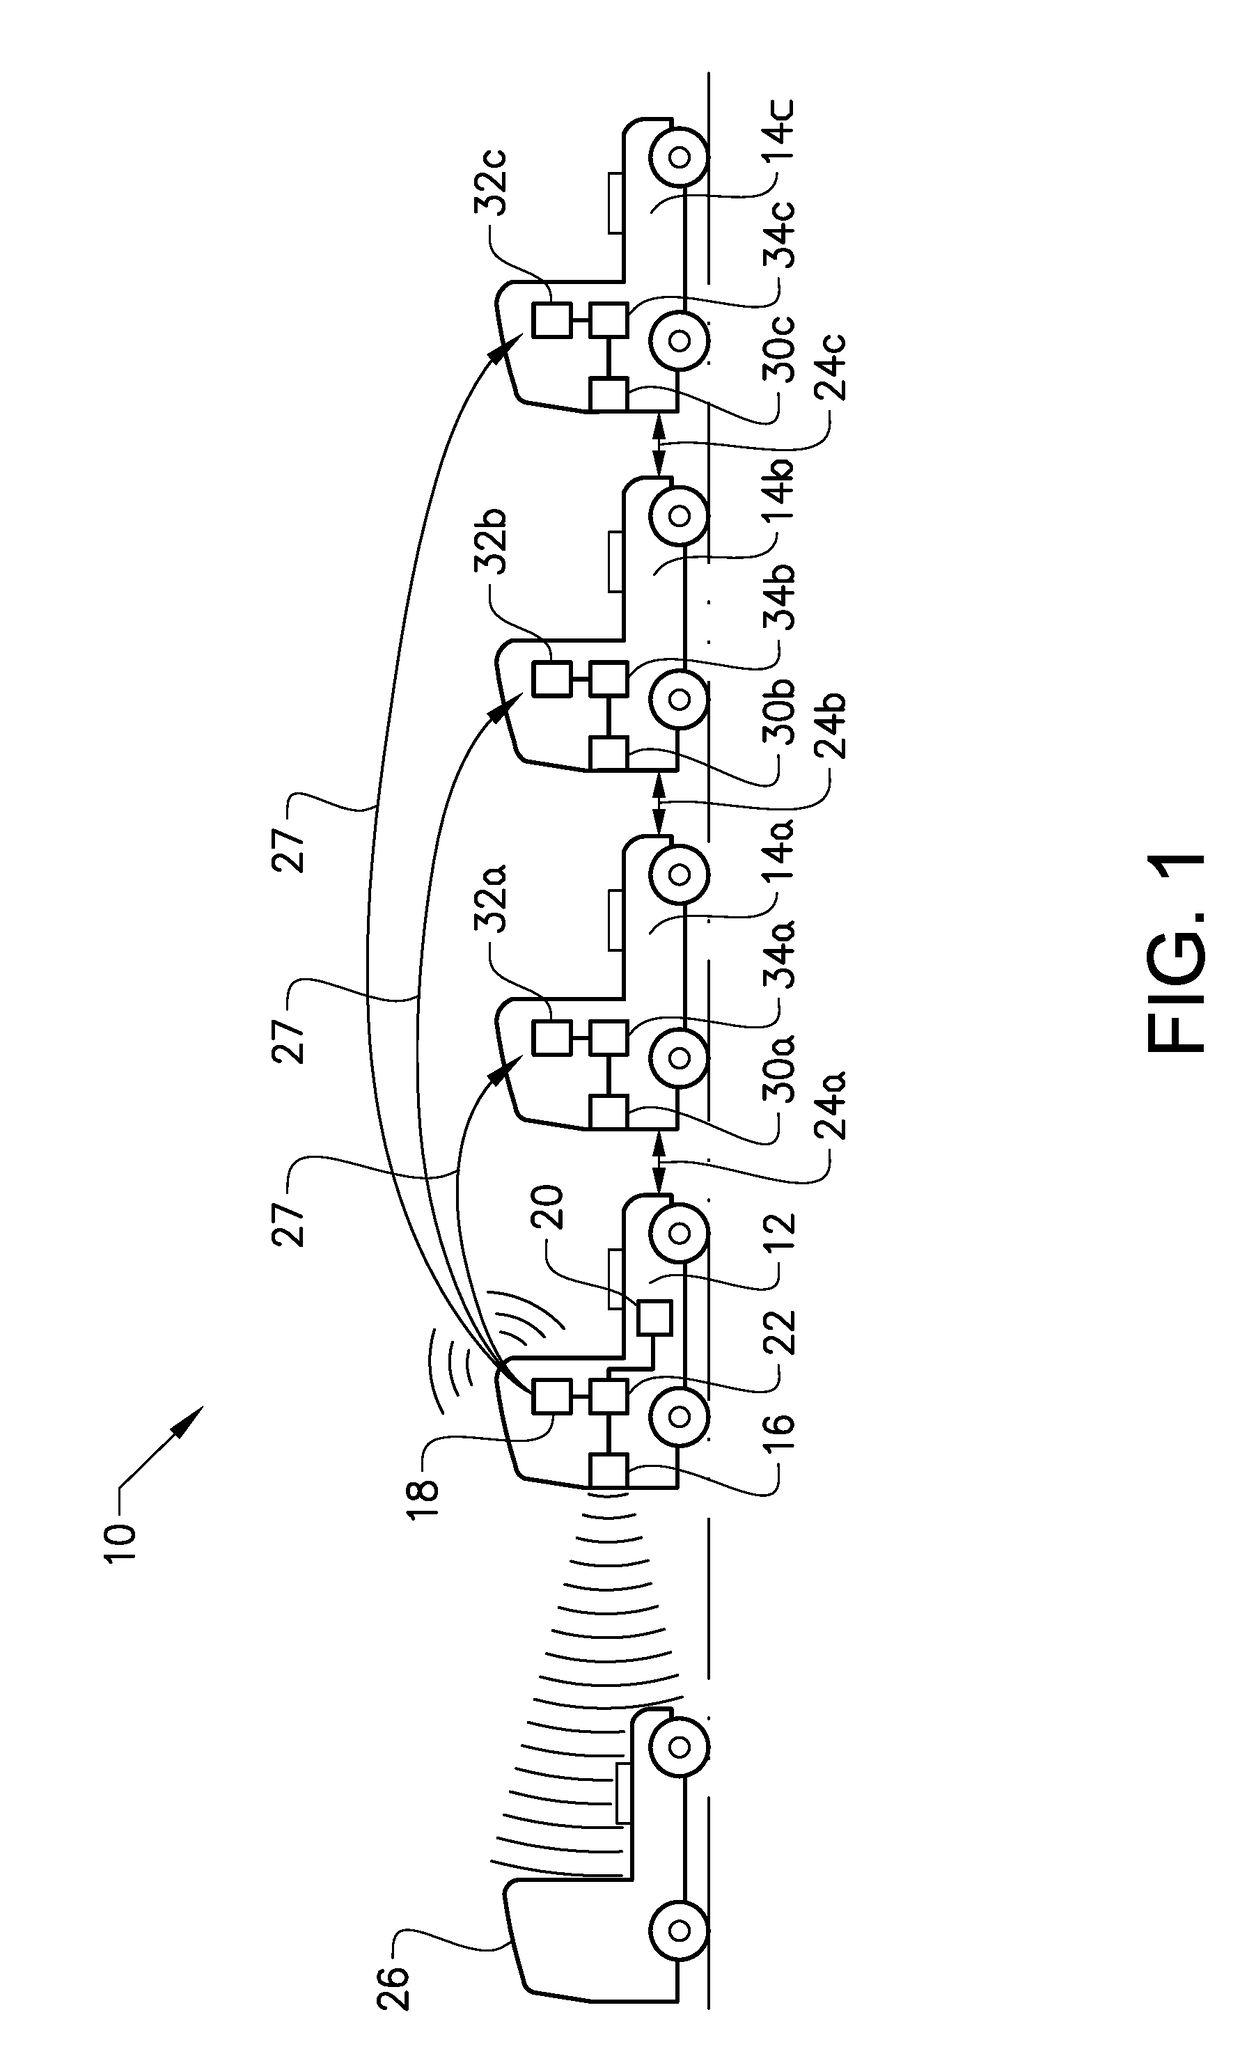 Method of controlling inter-vehicle gap(s) in a platoon